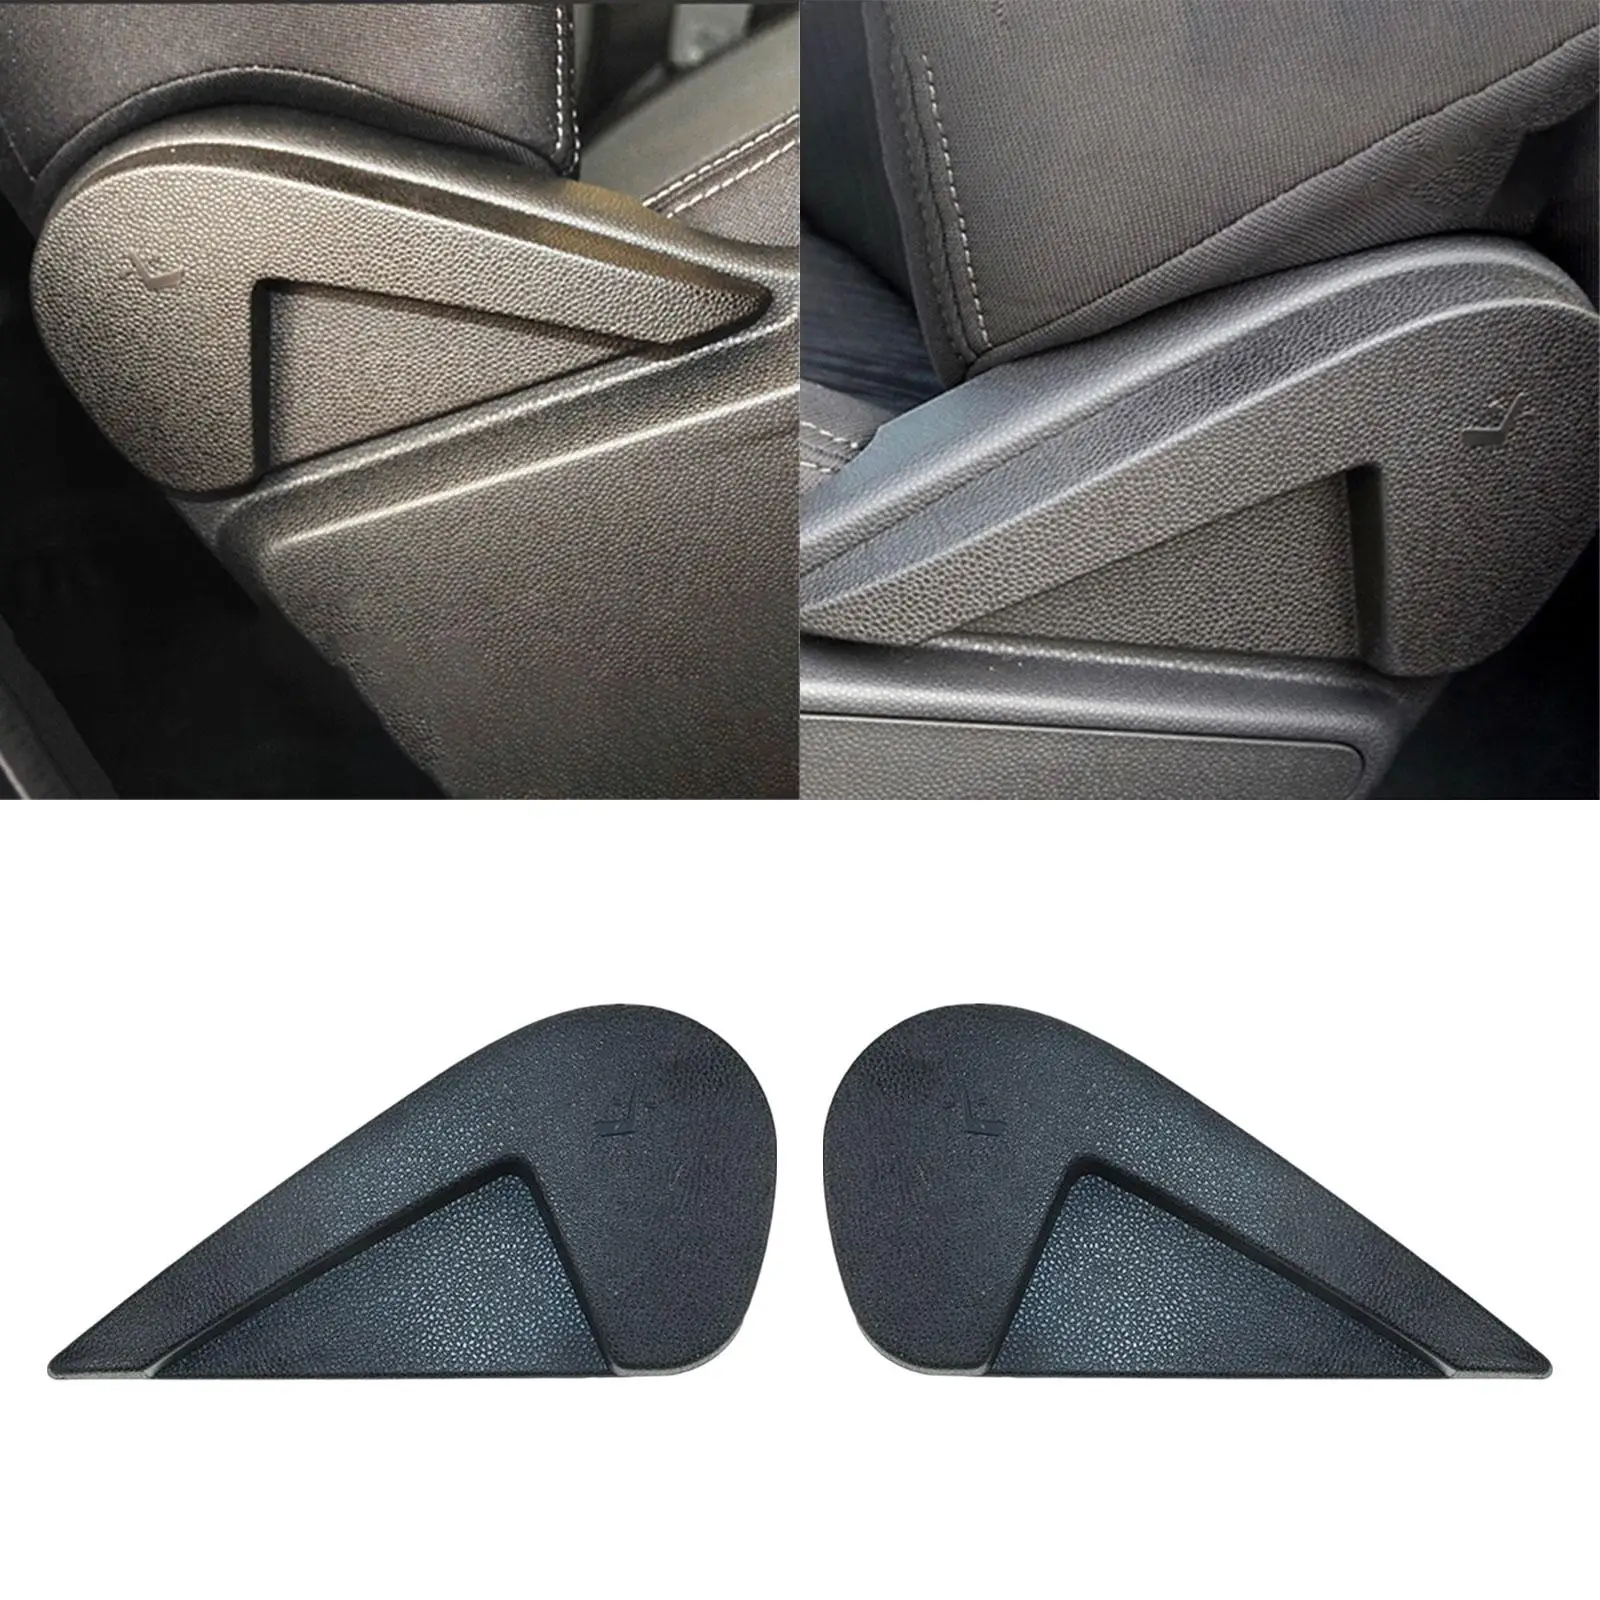 Seat Handle Adjuster Professional Automotive Accessories Replaces Easy to Install Replacement for Ford Ecosport 2013-2017